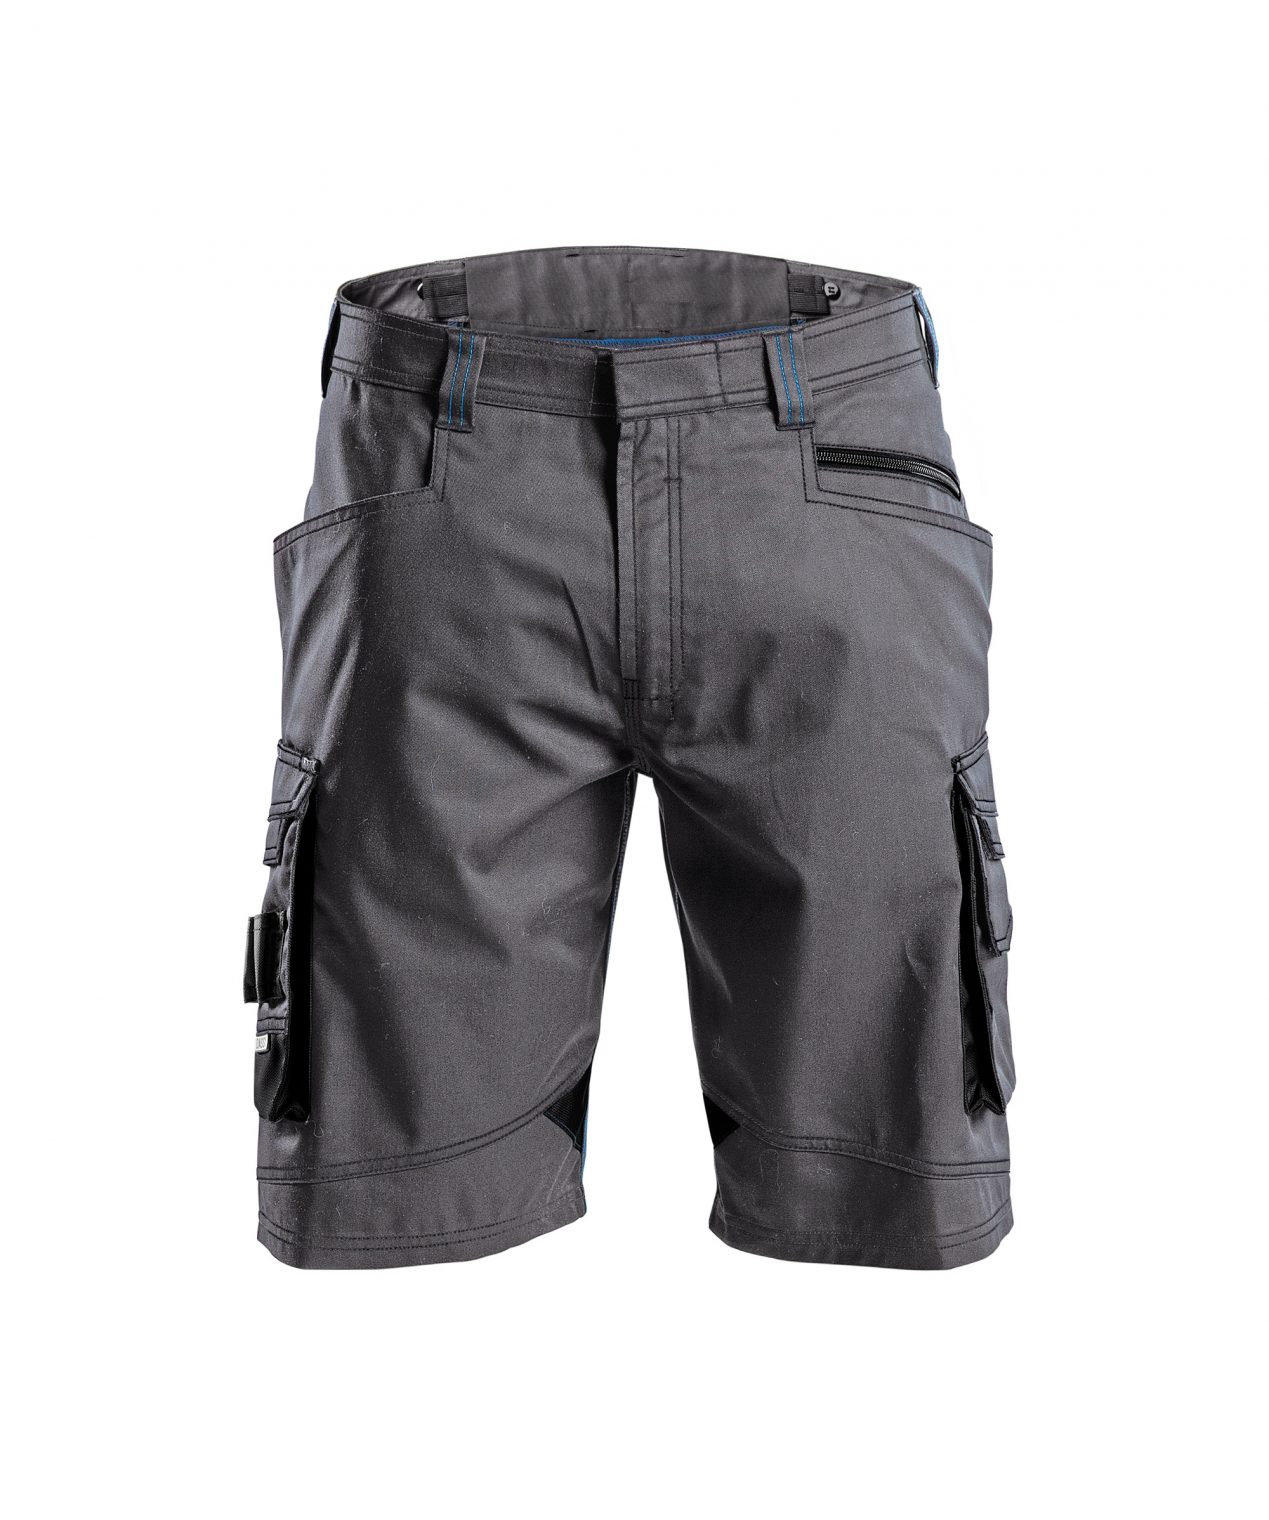 cosmic work shorts anthracite grey black front